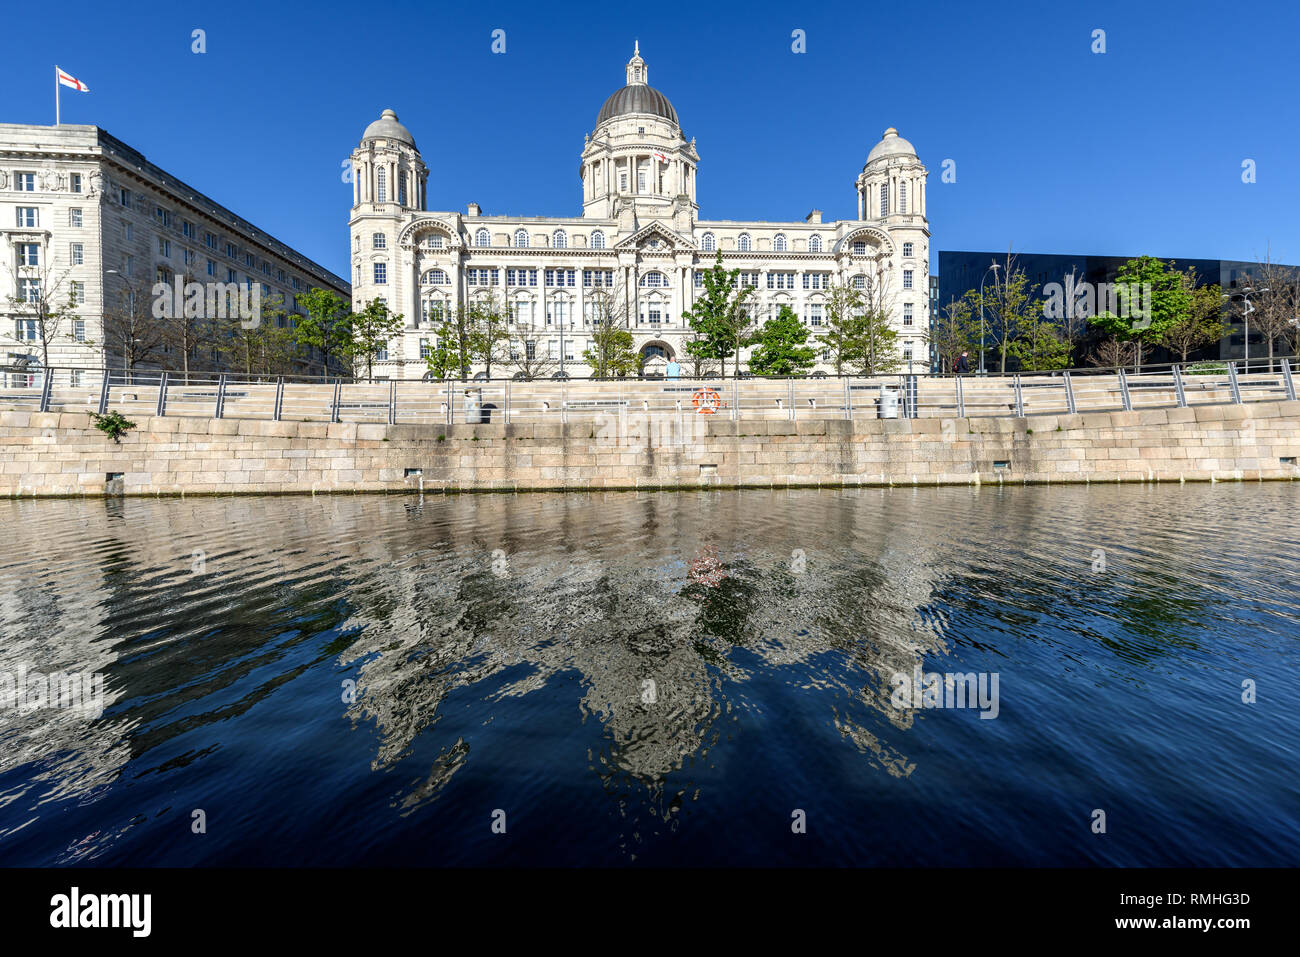 The Port of Liverpool Building is in the Edwardian Baroque style and is noted for the large dome that sits atop it. Stock Photo